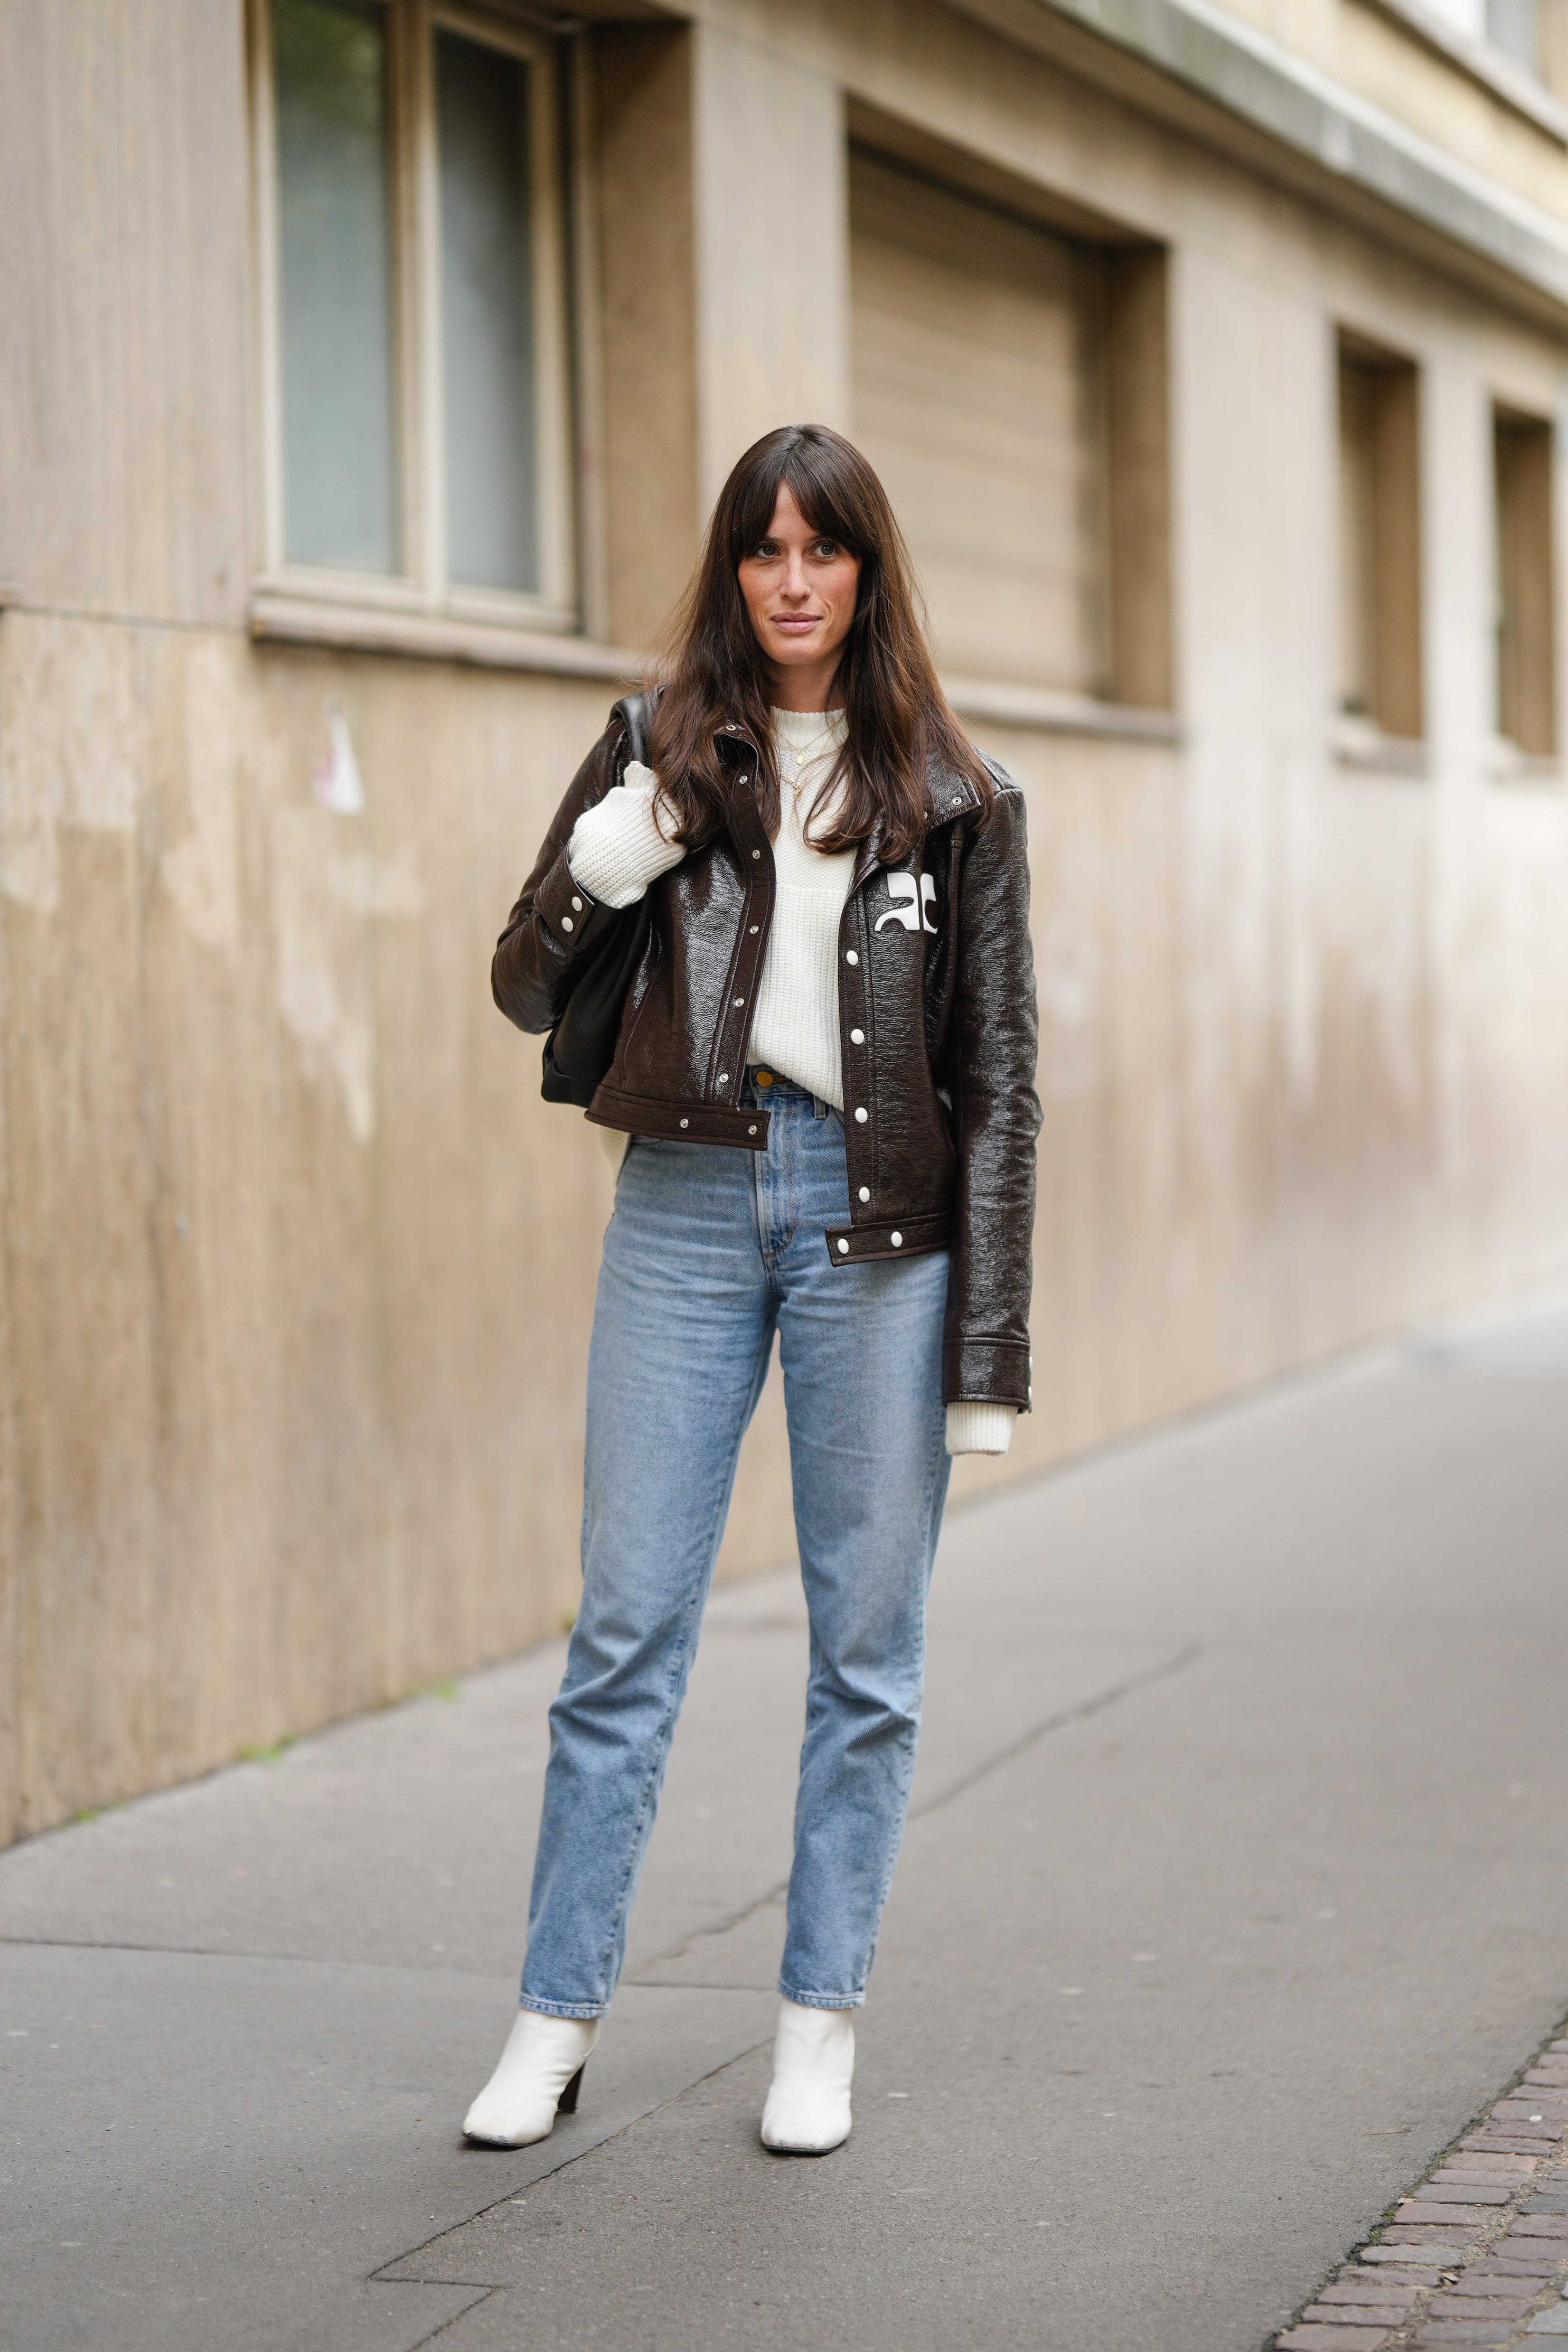 How To Wear Ankle Boots With Jeans This Winter